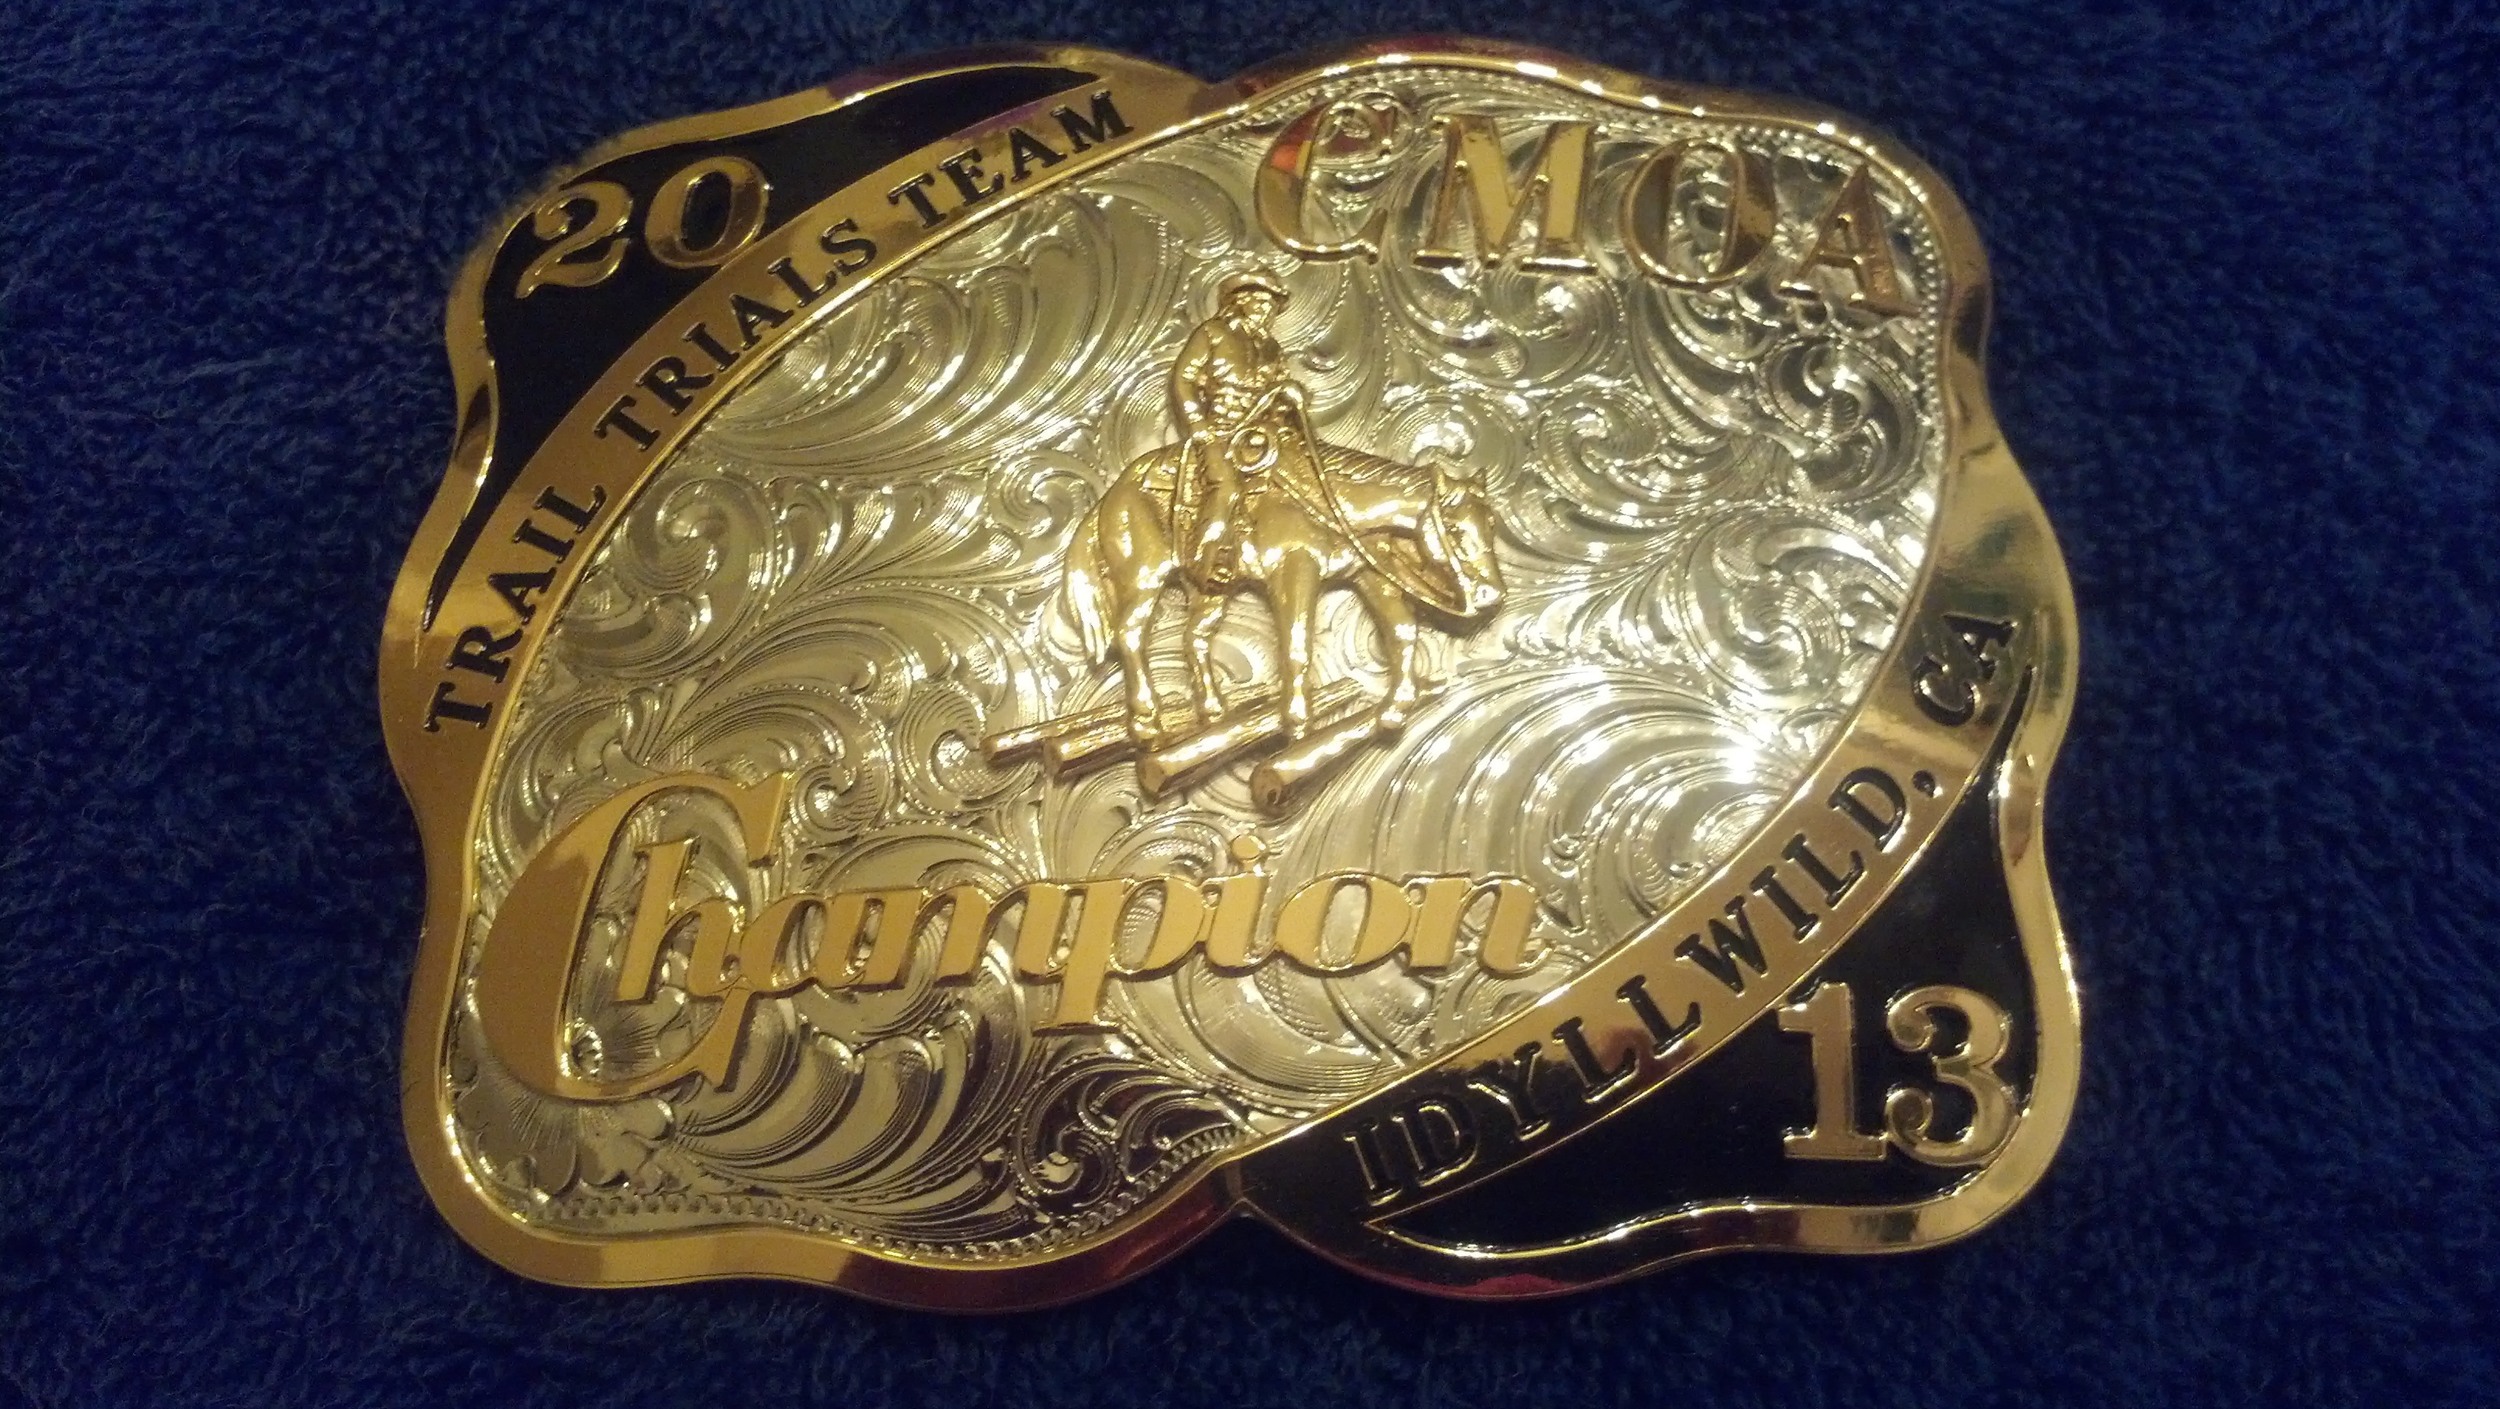 The champion belt buckles which were presented to the winning team